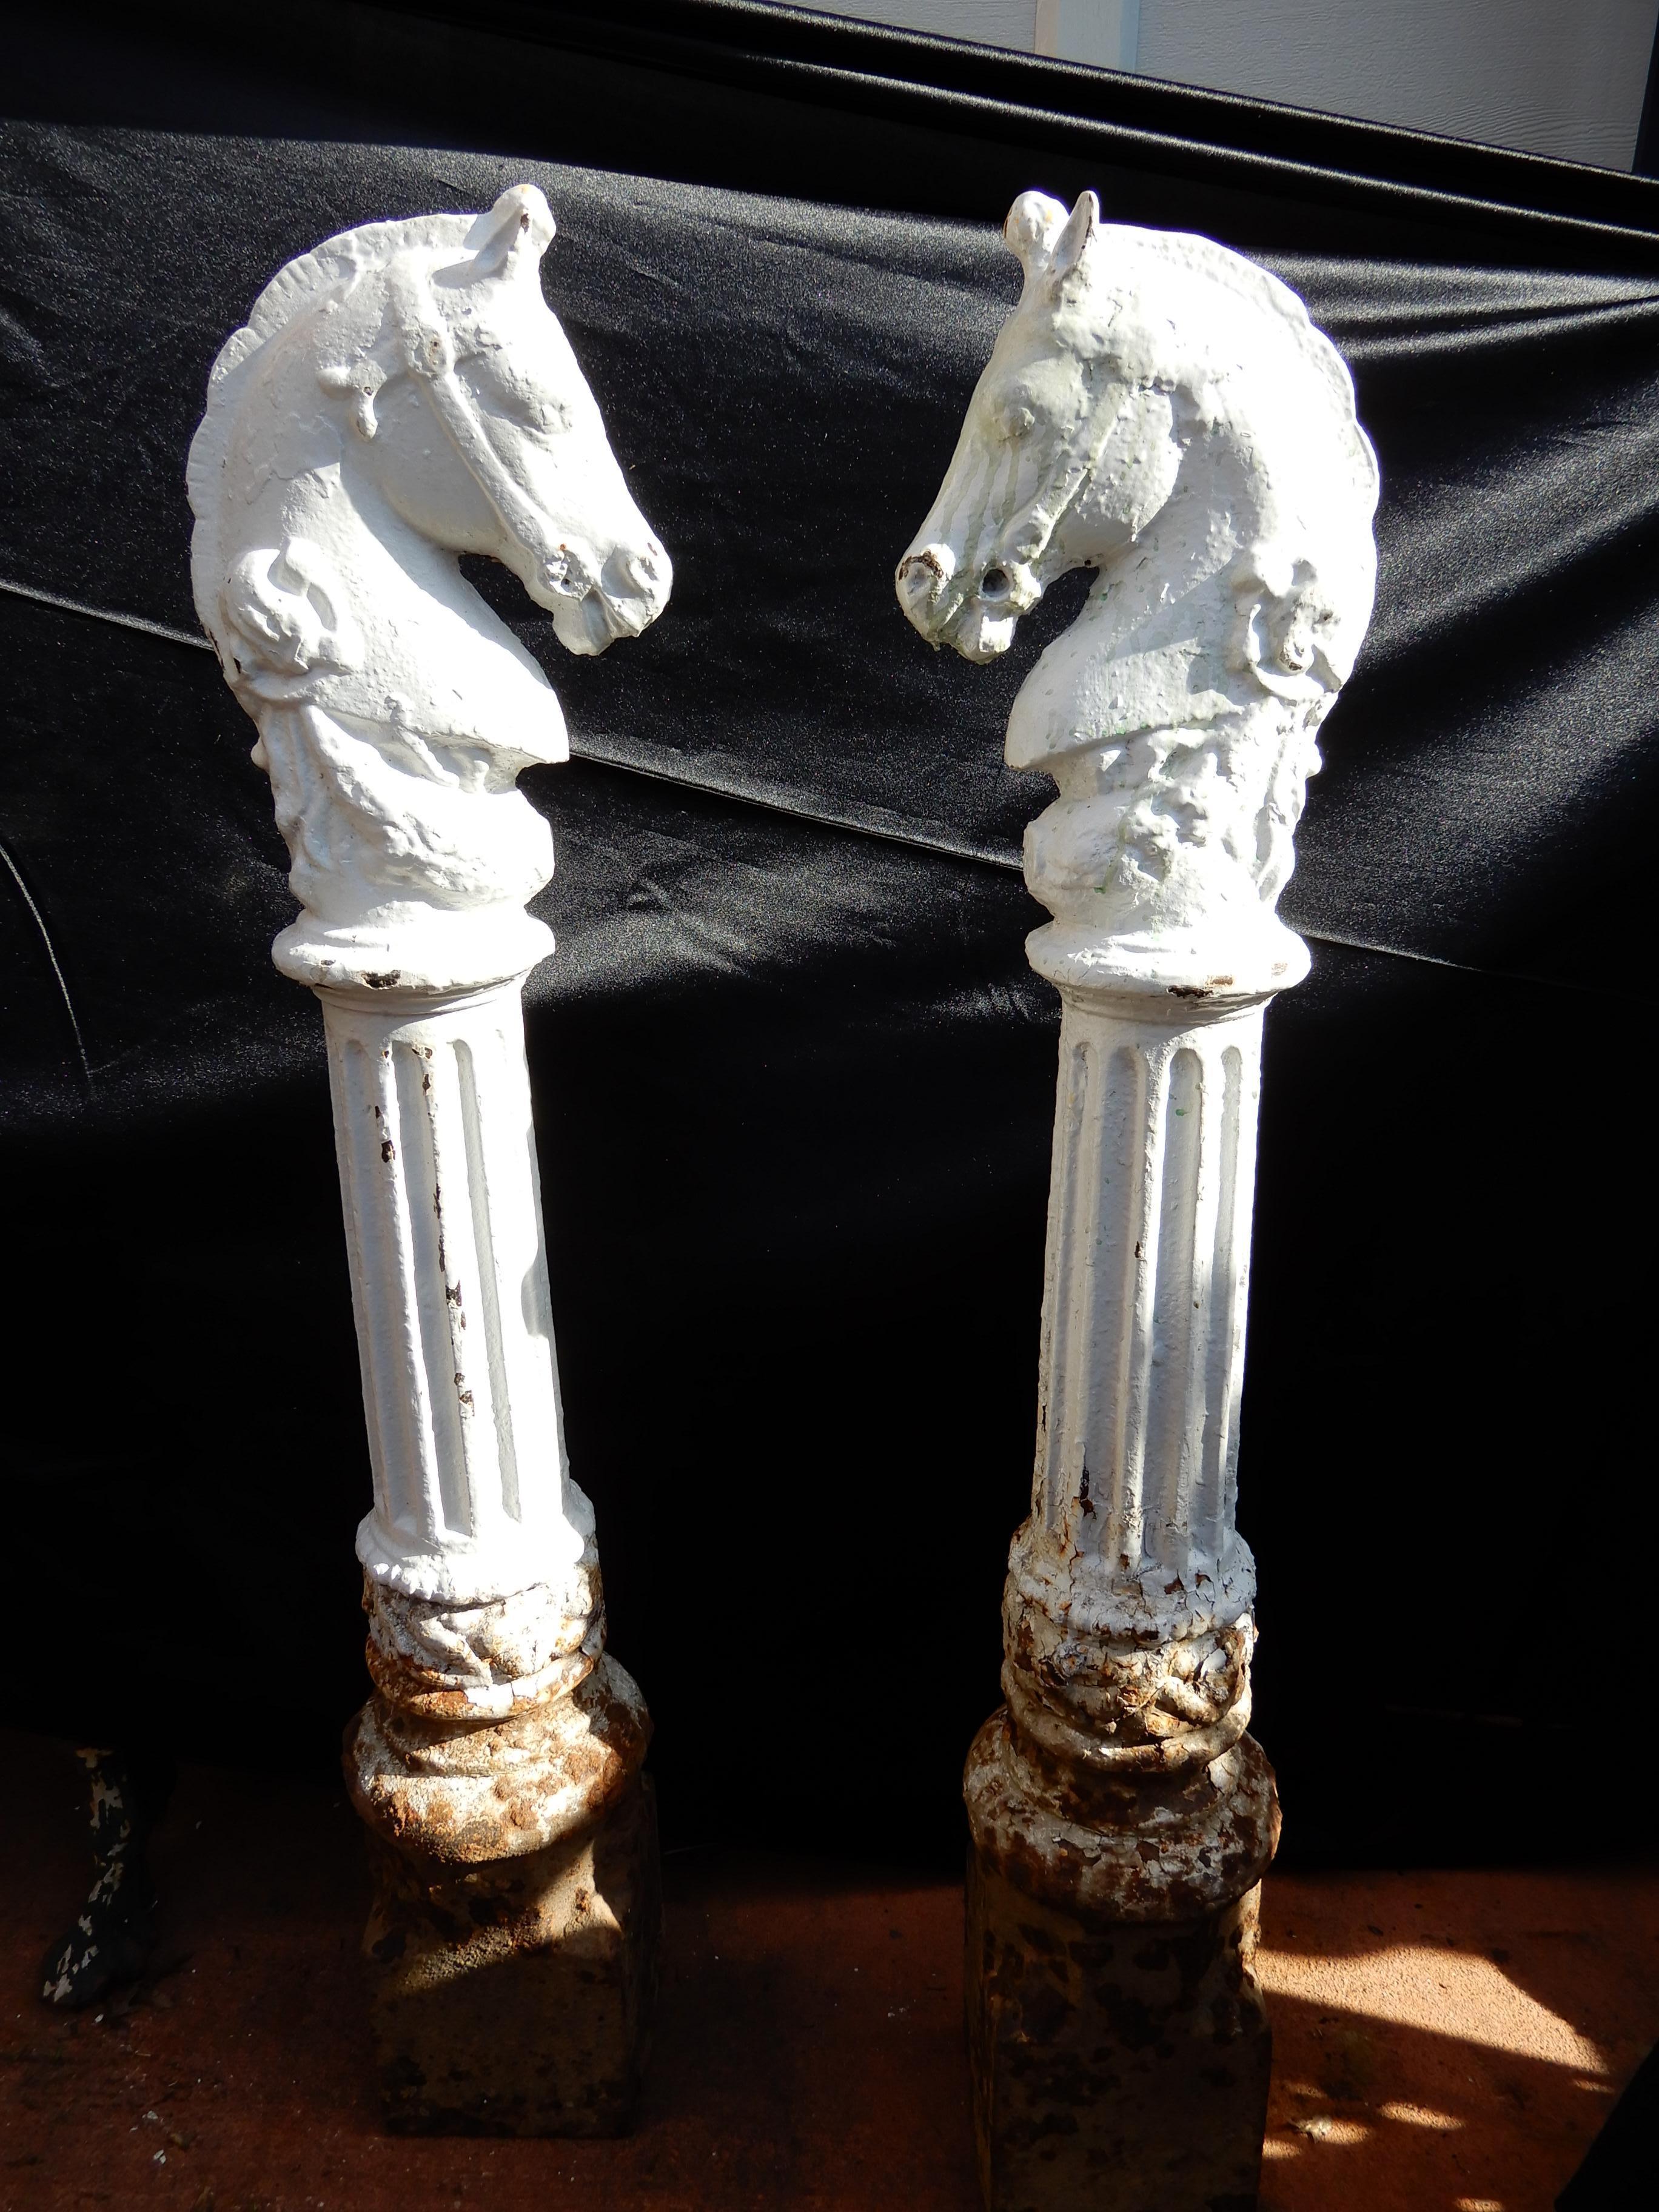 A pair of 19th century cast iron horse head hitching posts. The horse heads have had the rings removed by a prior owner. The hitching posts have crisply carved detail on the horse heads.